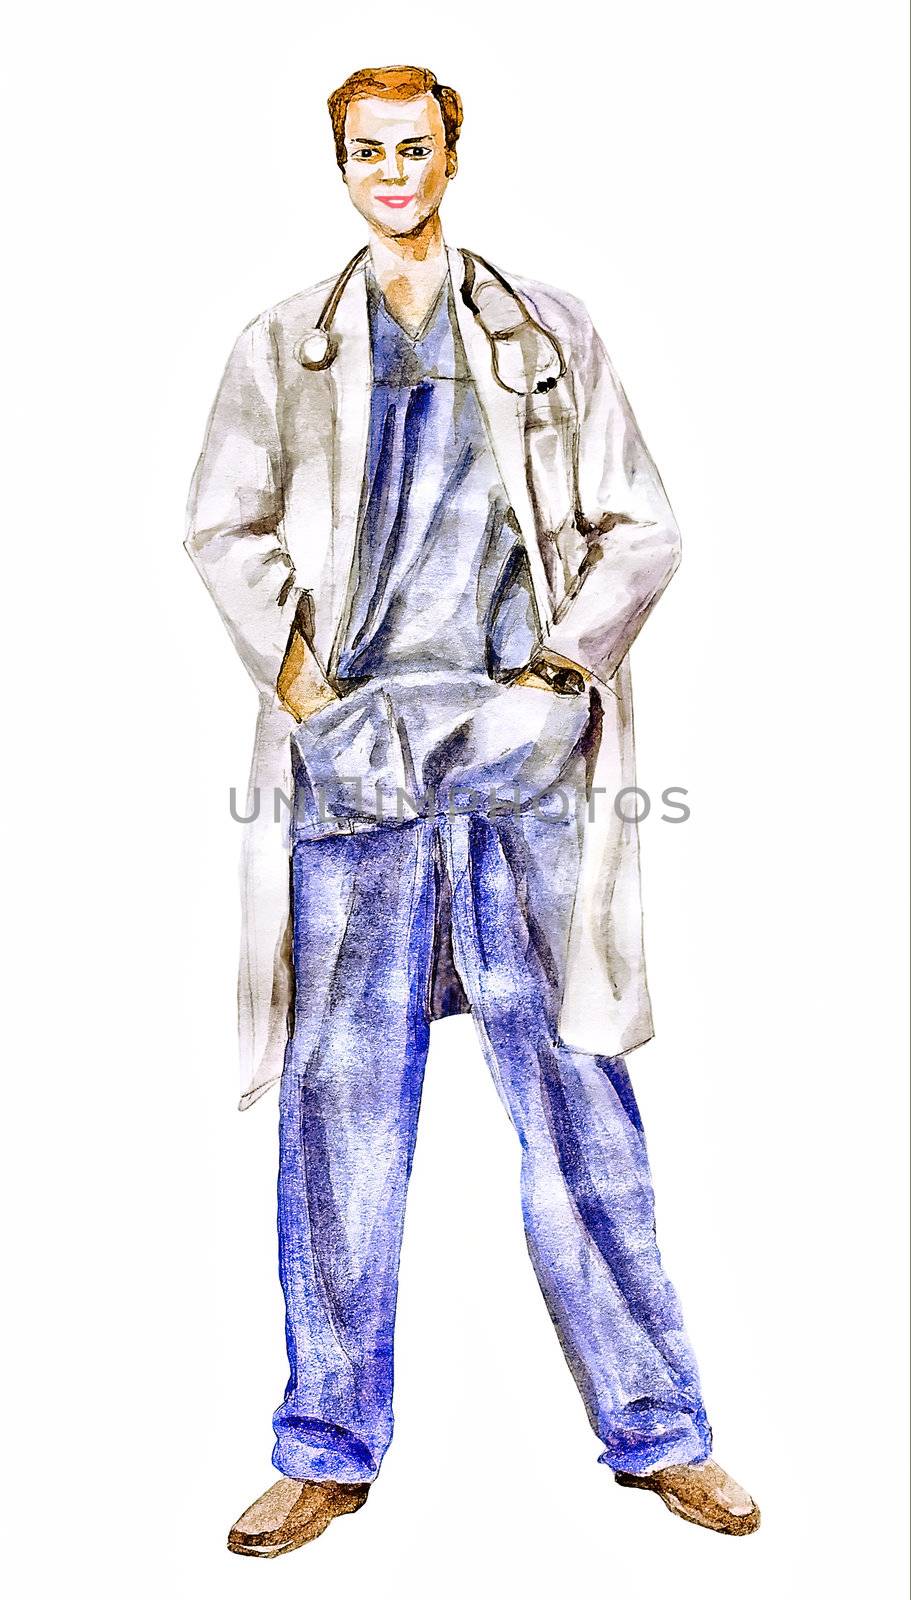 Doctor (physician trust a man who) illustration by selhin